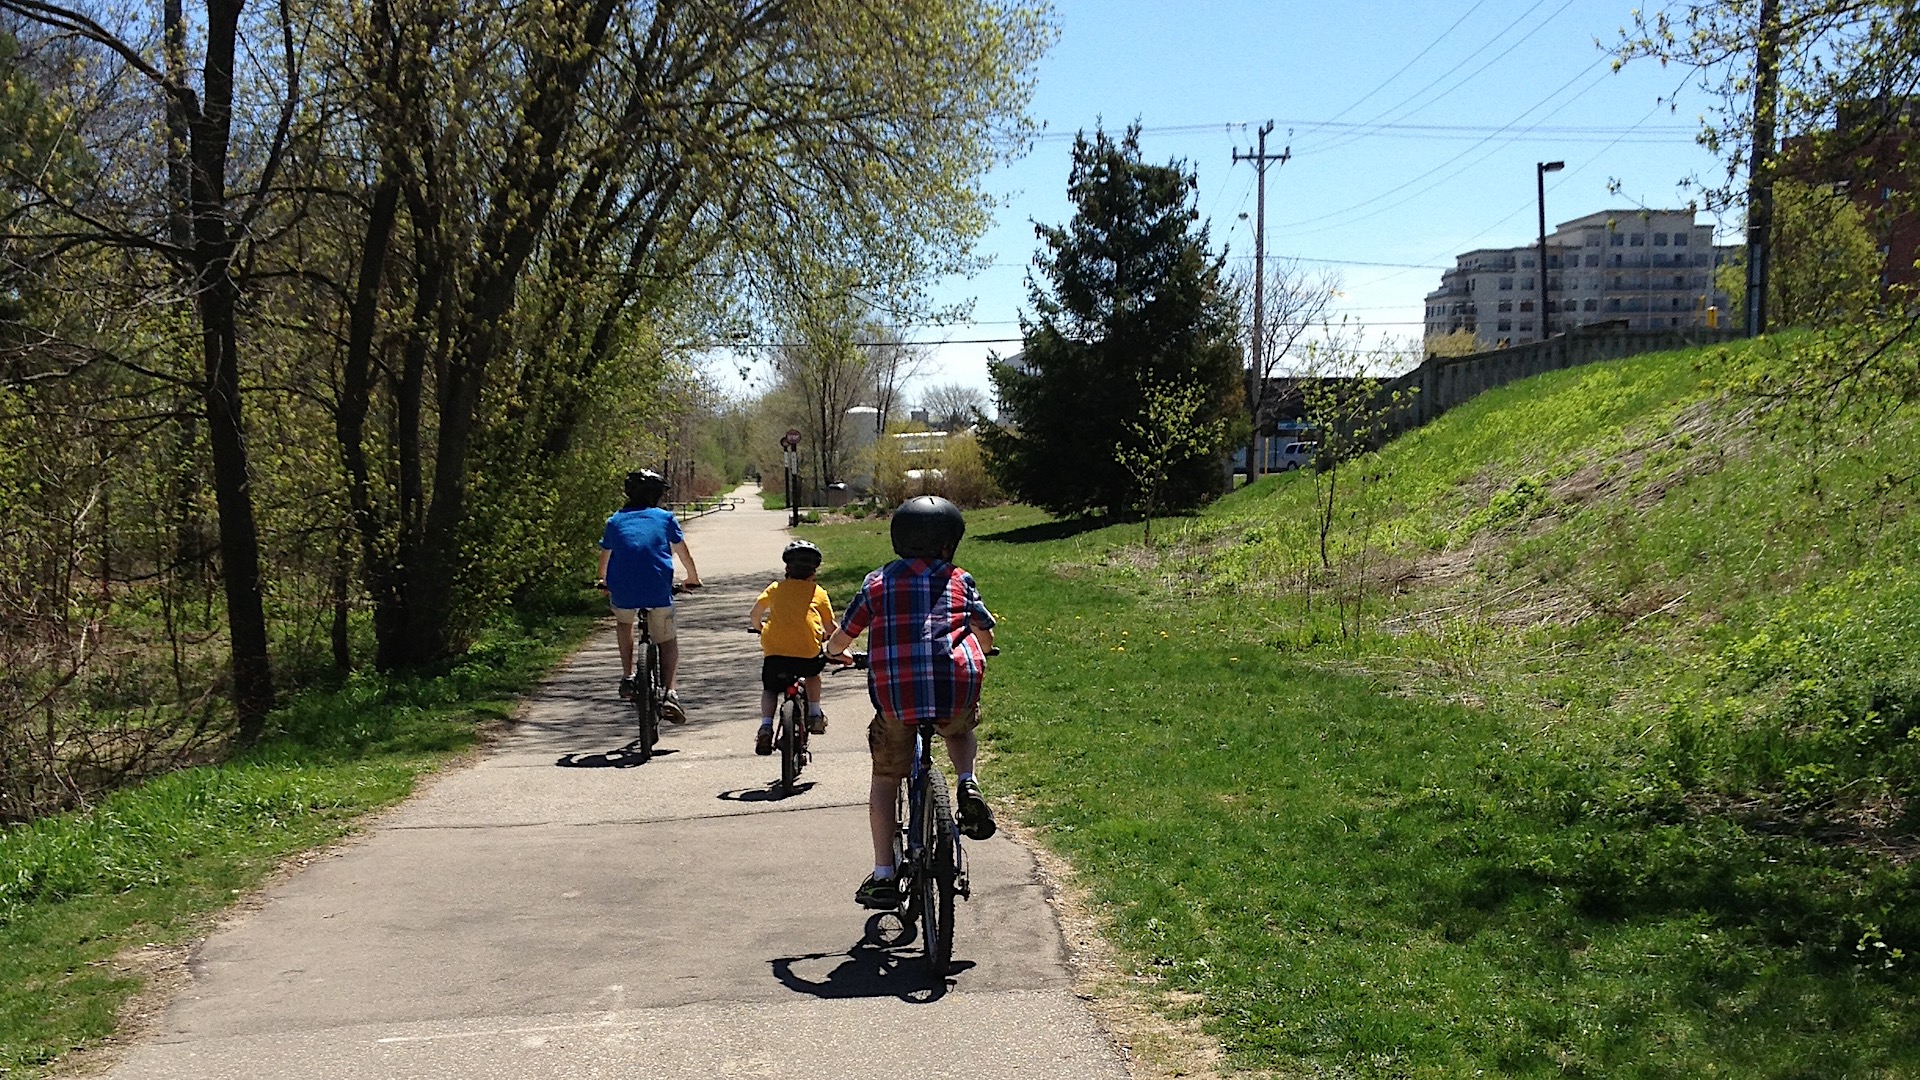 Three children on bikes are cycling away from the viewer on an asphalt multi-use path. Grass and trees are visible on either side of the path.